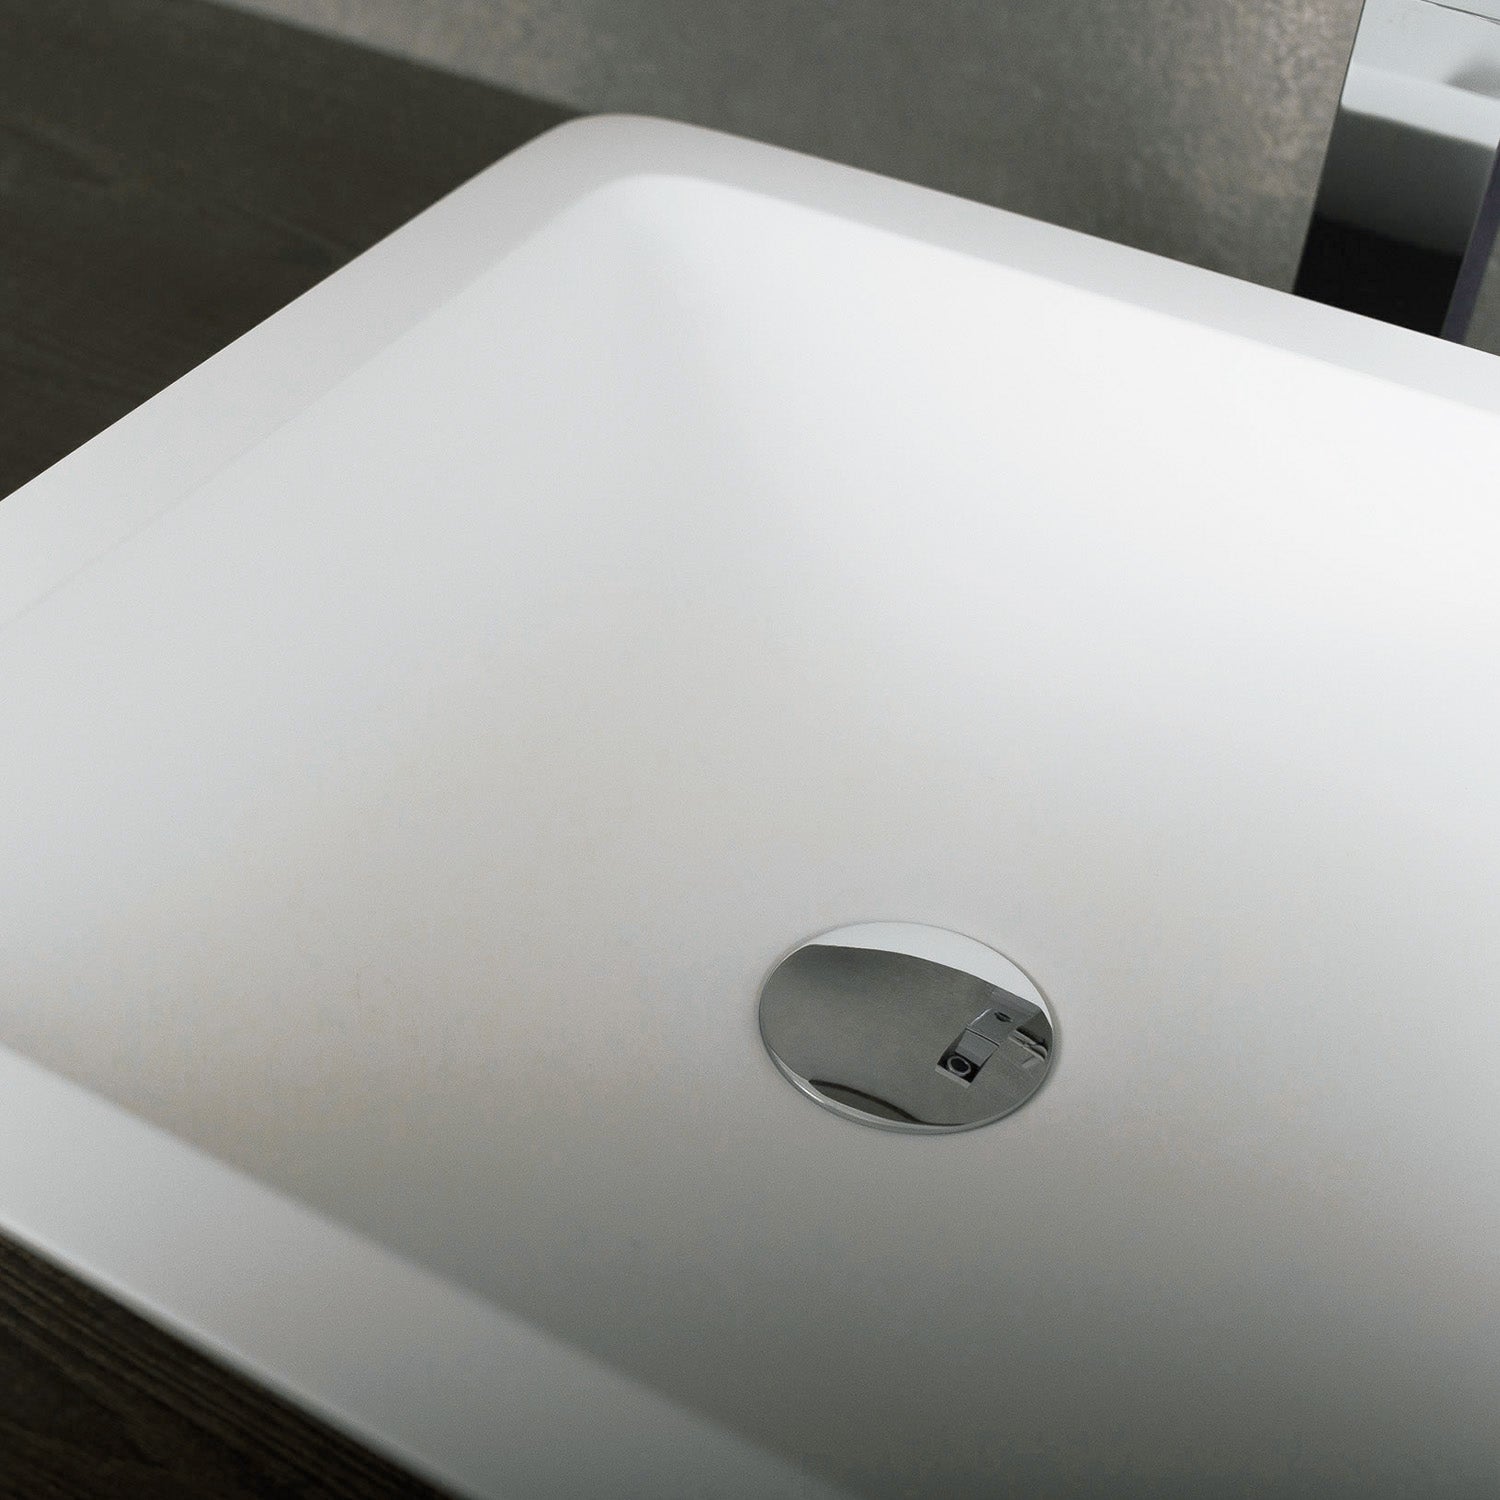 DAX Solid Surface Square Single Bowl Bathroom Vessel Sink, White Matte Finish, 16-1/2 x 16-1/2 x 4 Inches (DAX-AB-1320)